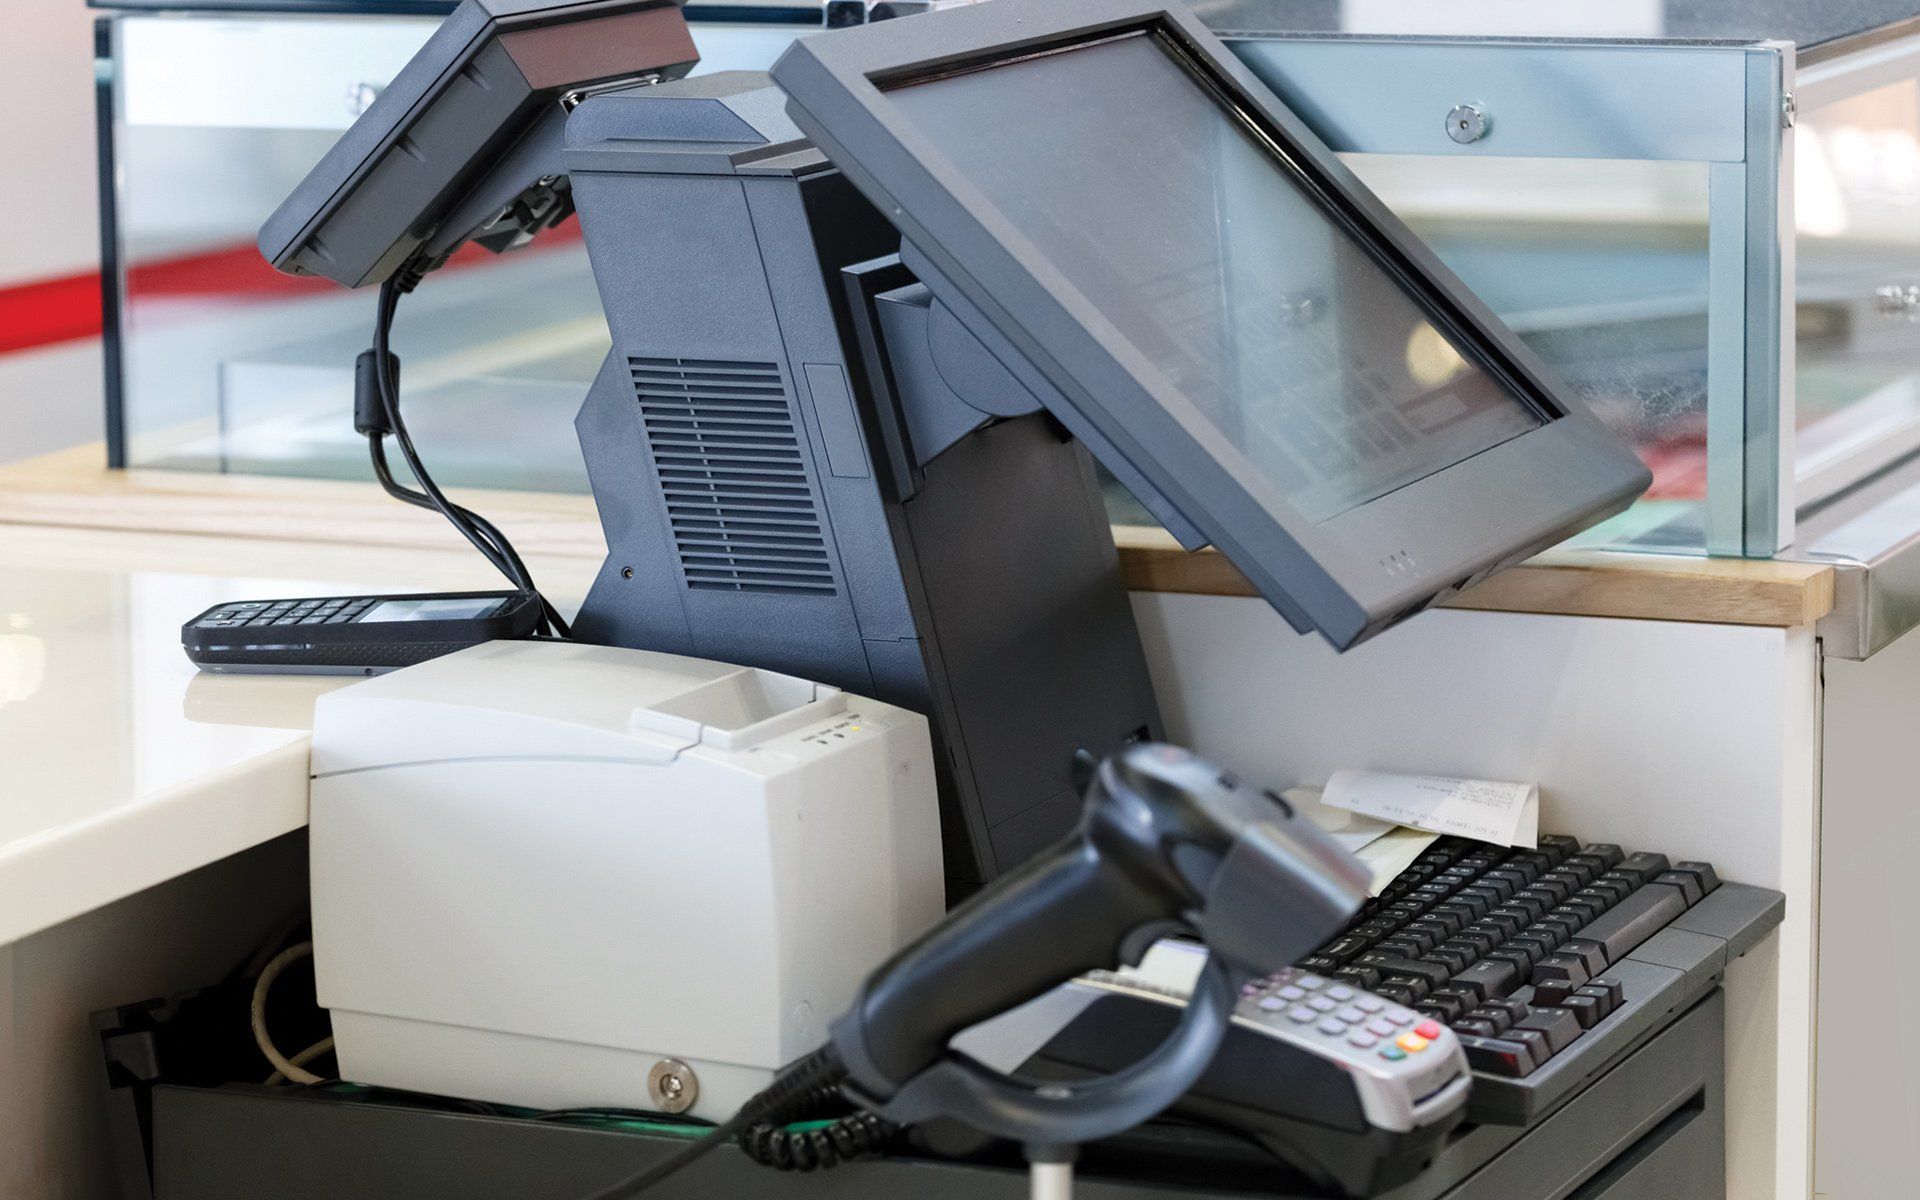 Computer with POS Terminal — Easthampton, MA — Forbes Snyder Advanced Business Solutions